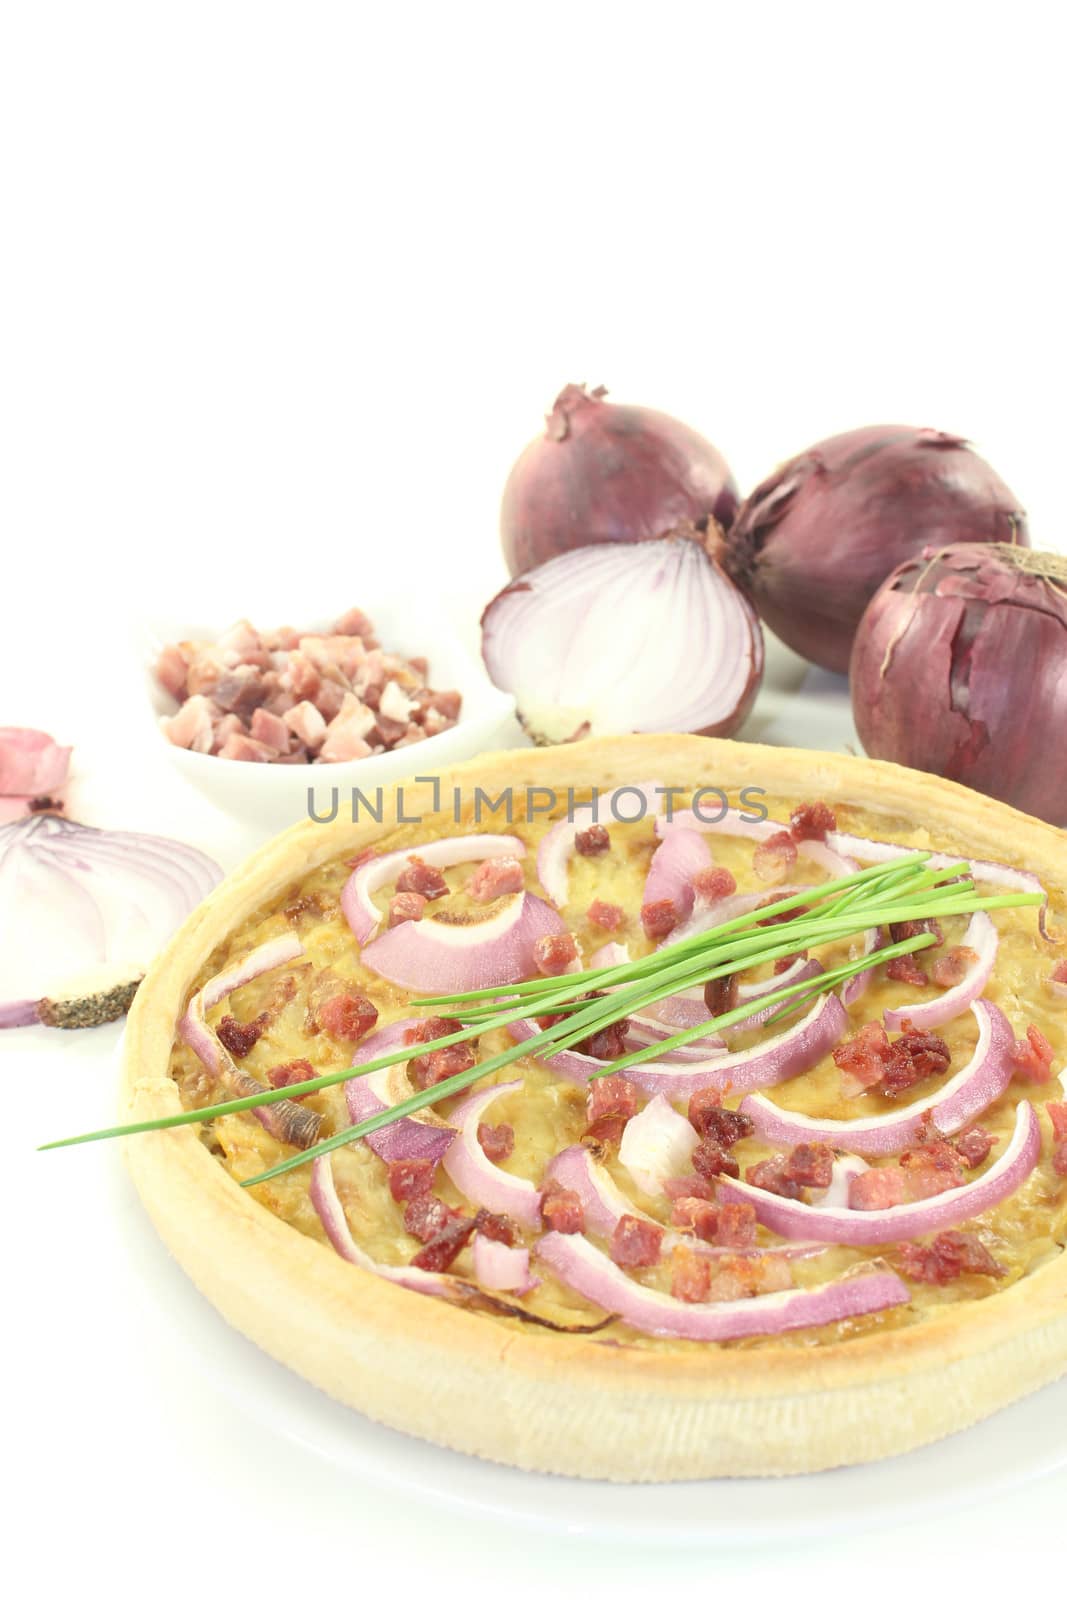 Onion tart by discovery